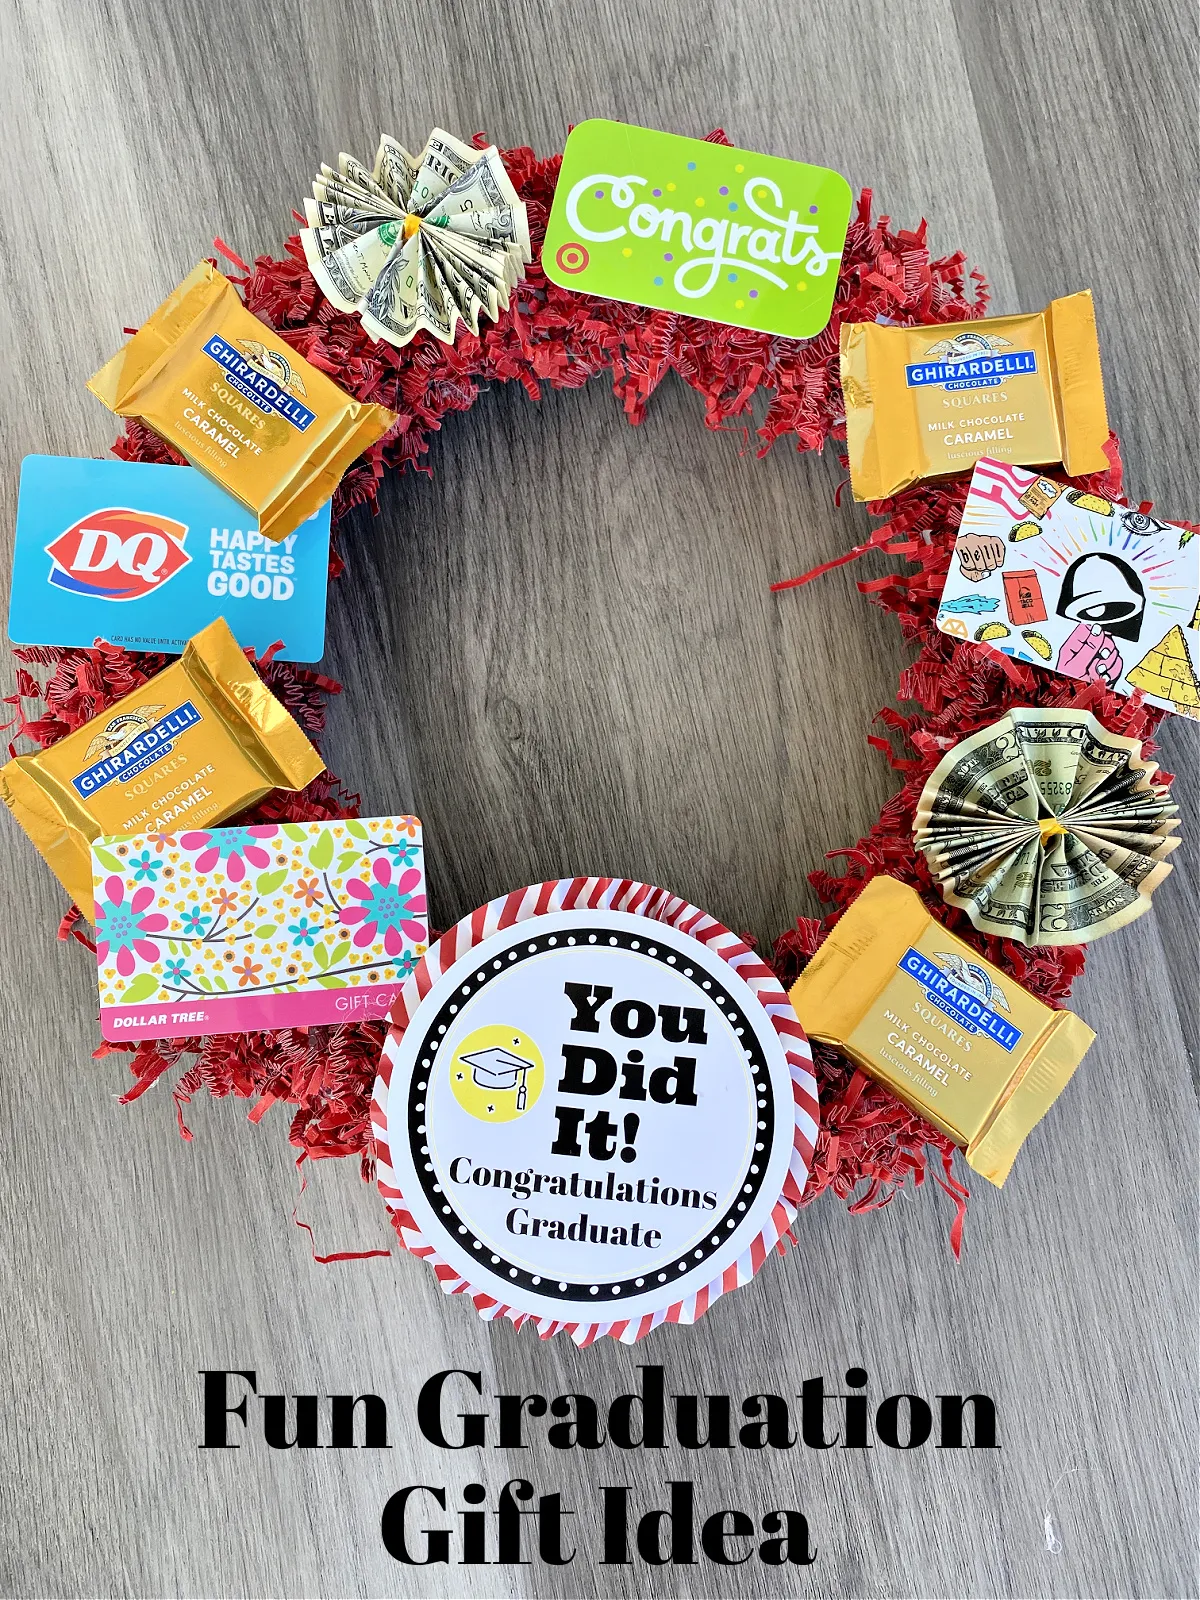 Money and Gift Card Wreath: